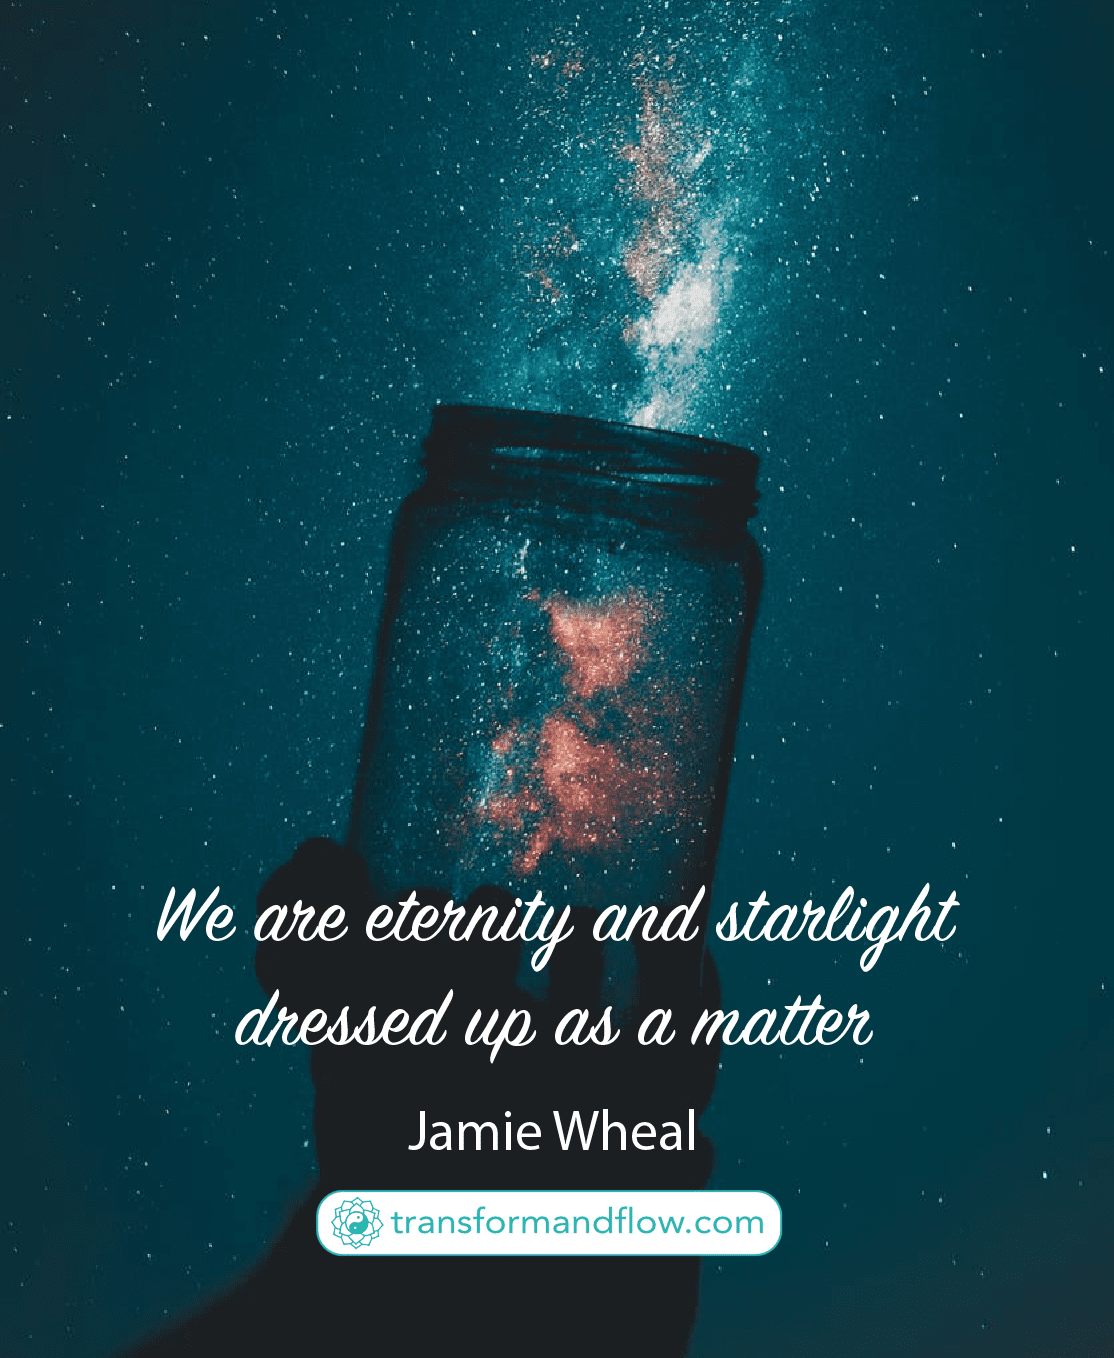 "We are eternity and starlight dressed up as a matter" Jamie Wheal